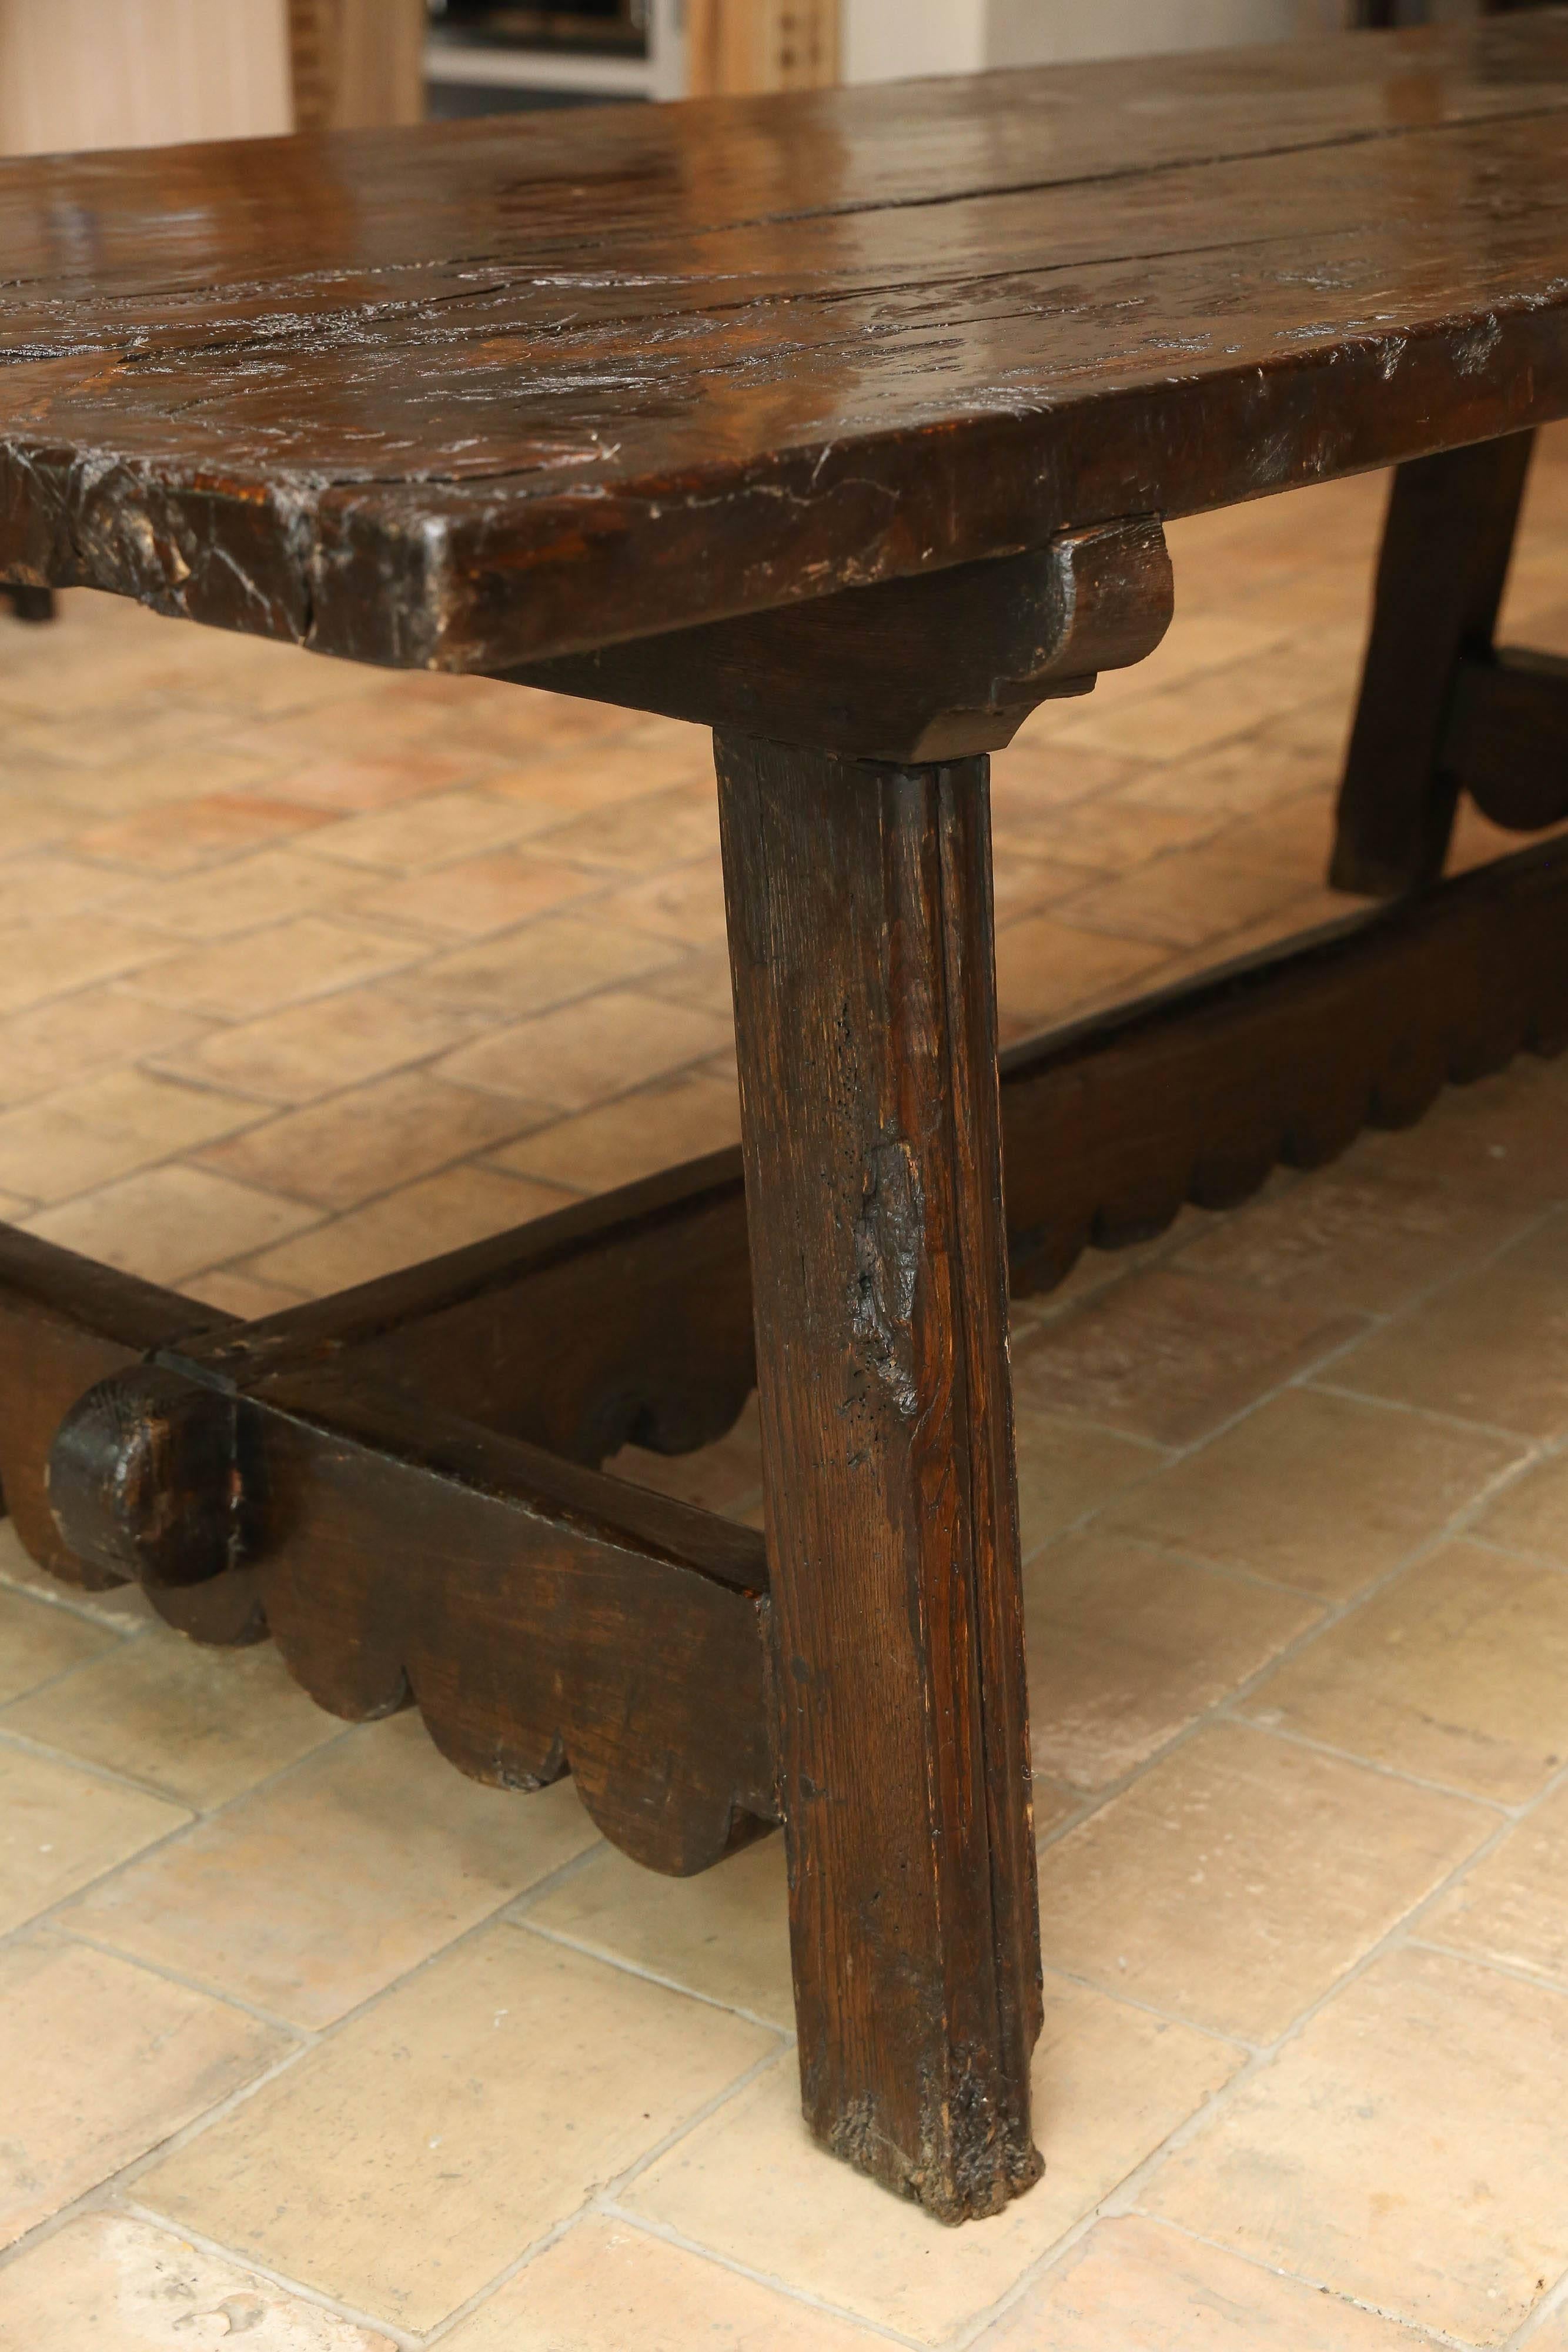 18th century thick slab walnut table with a two board top. The base is a 100 years old. Table is from the Abuzzo region of Italy. Both the legs and the trestle have a hand-carved scallop detail a variation on the St. Antonio style.